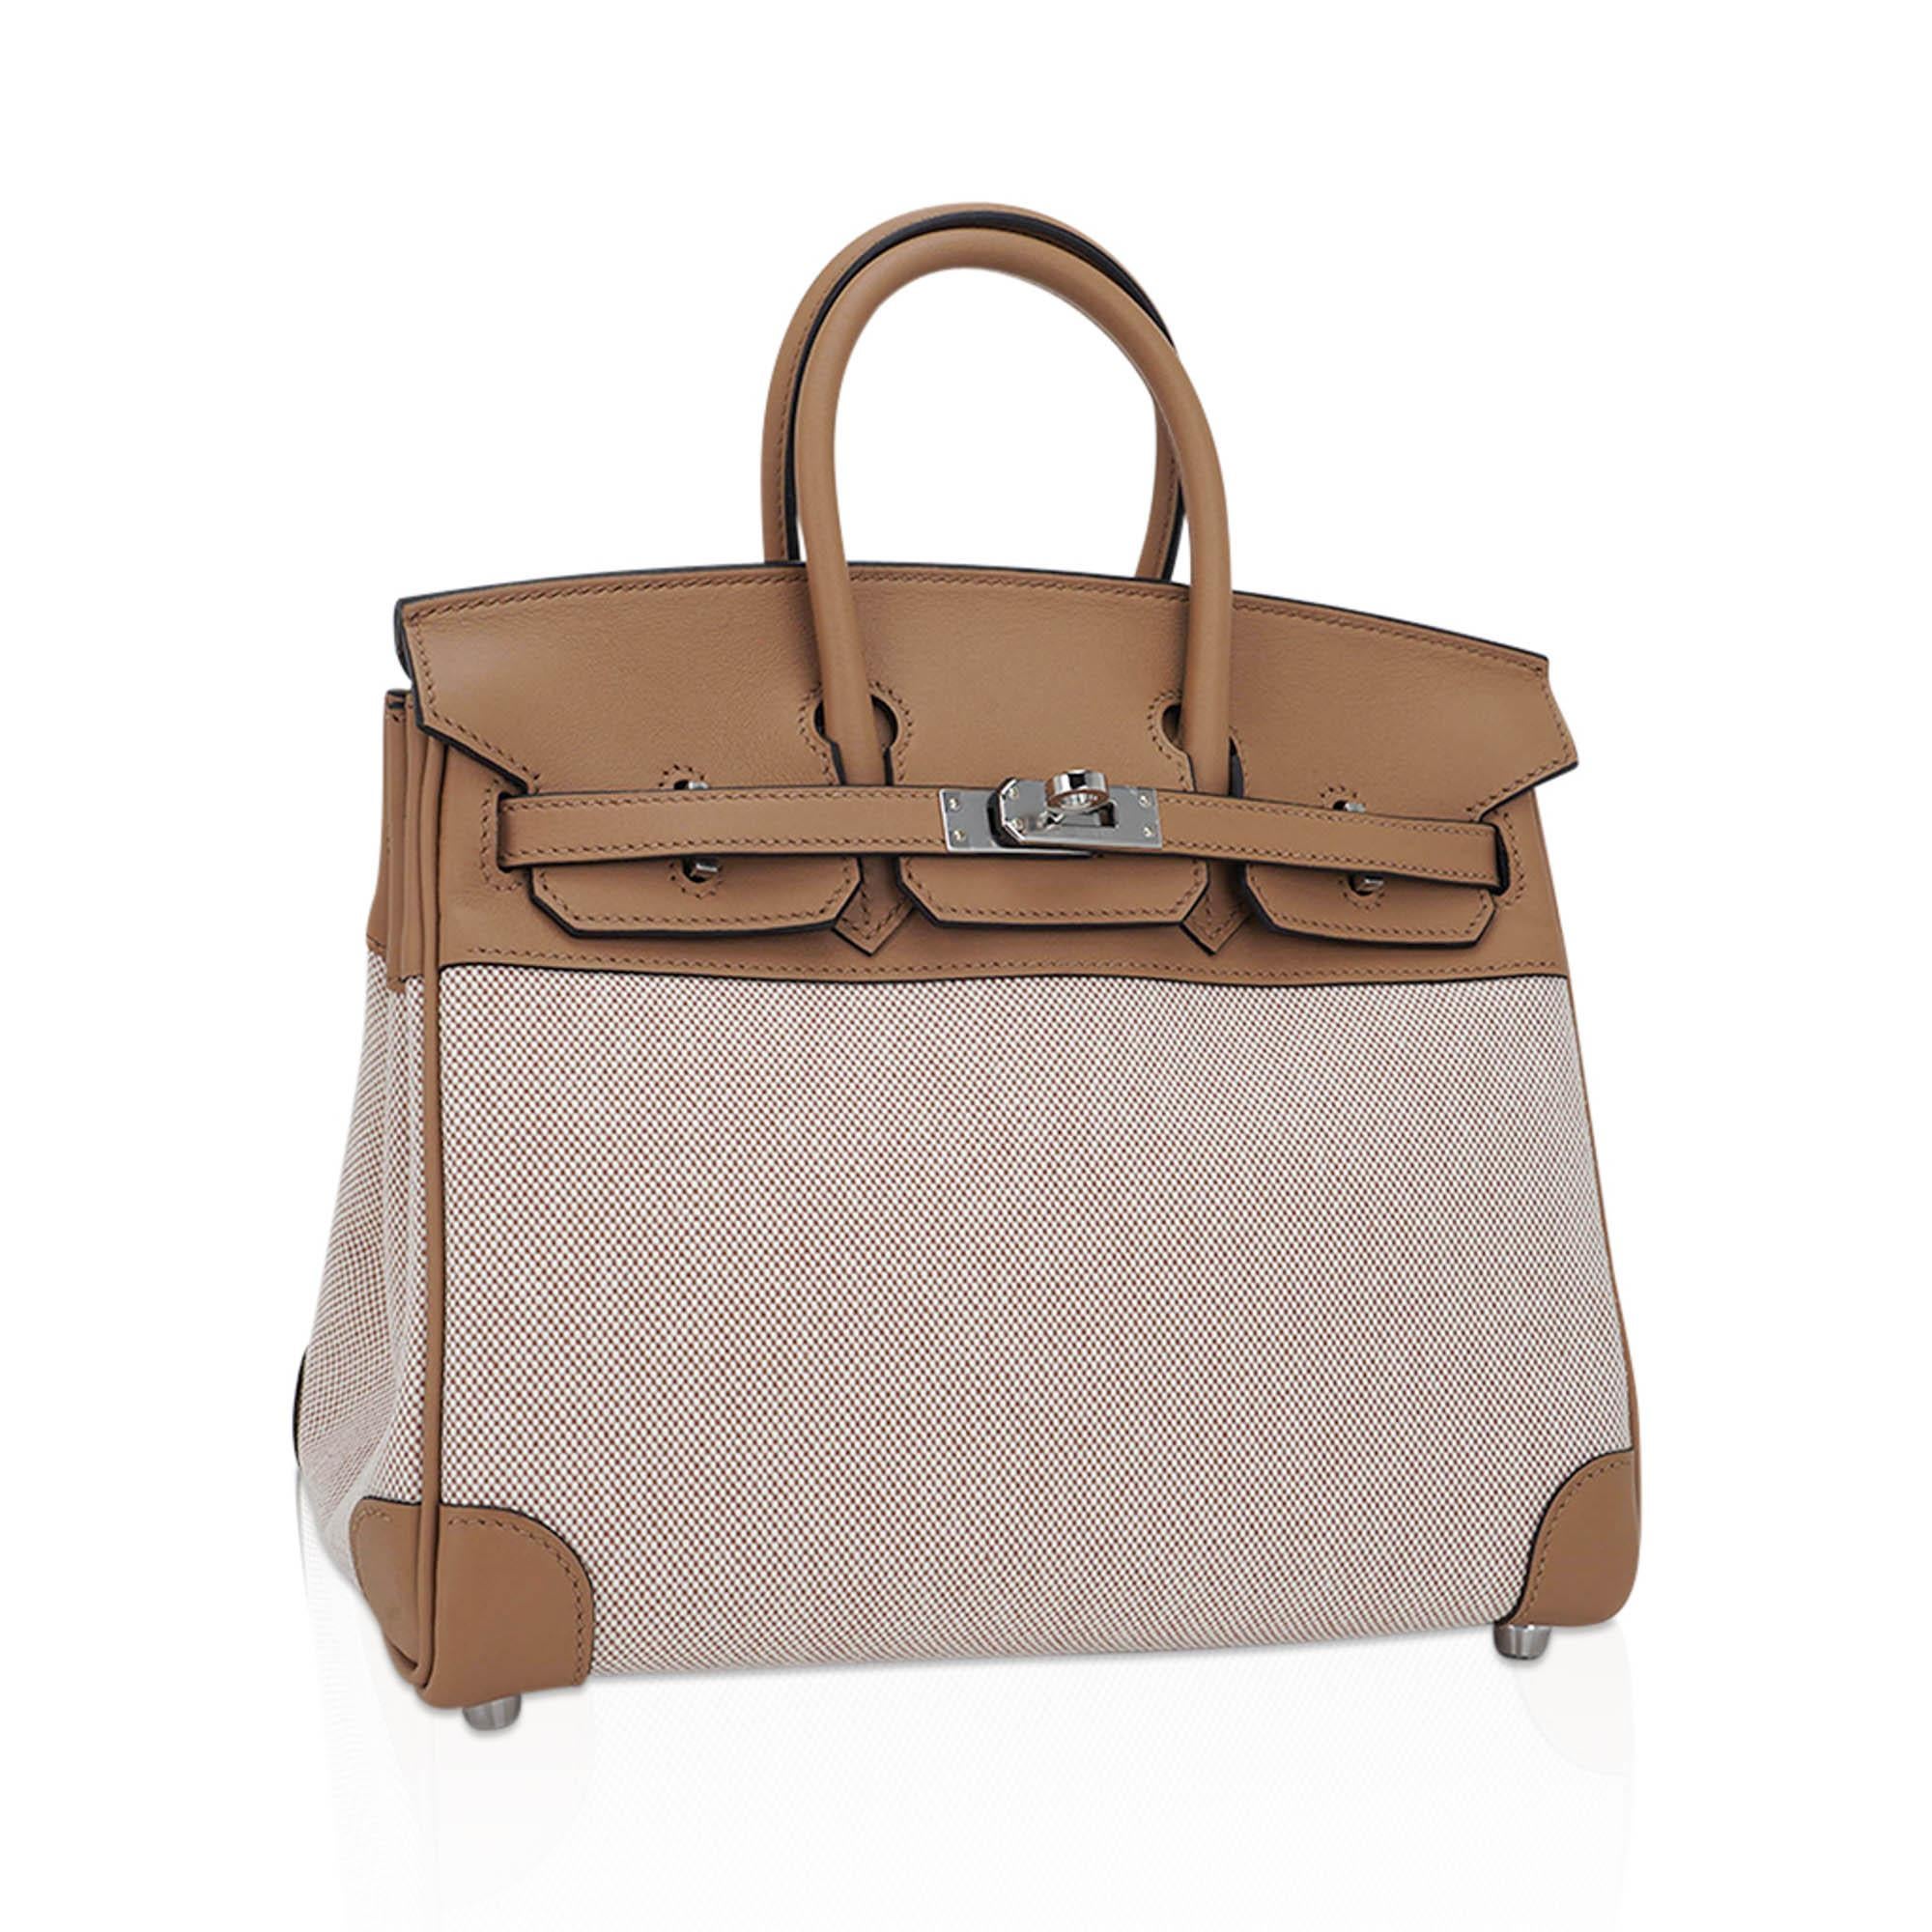 Mightychic offers a limited edition Hermes Birkin 25 bag featured in coveted Toile H in beige and ecru with Chai Swift leather.
This prized Toile Birkin in a 25 is virtually impossible to find, and true collectors treasure.
Rich neutral Hermes